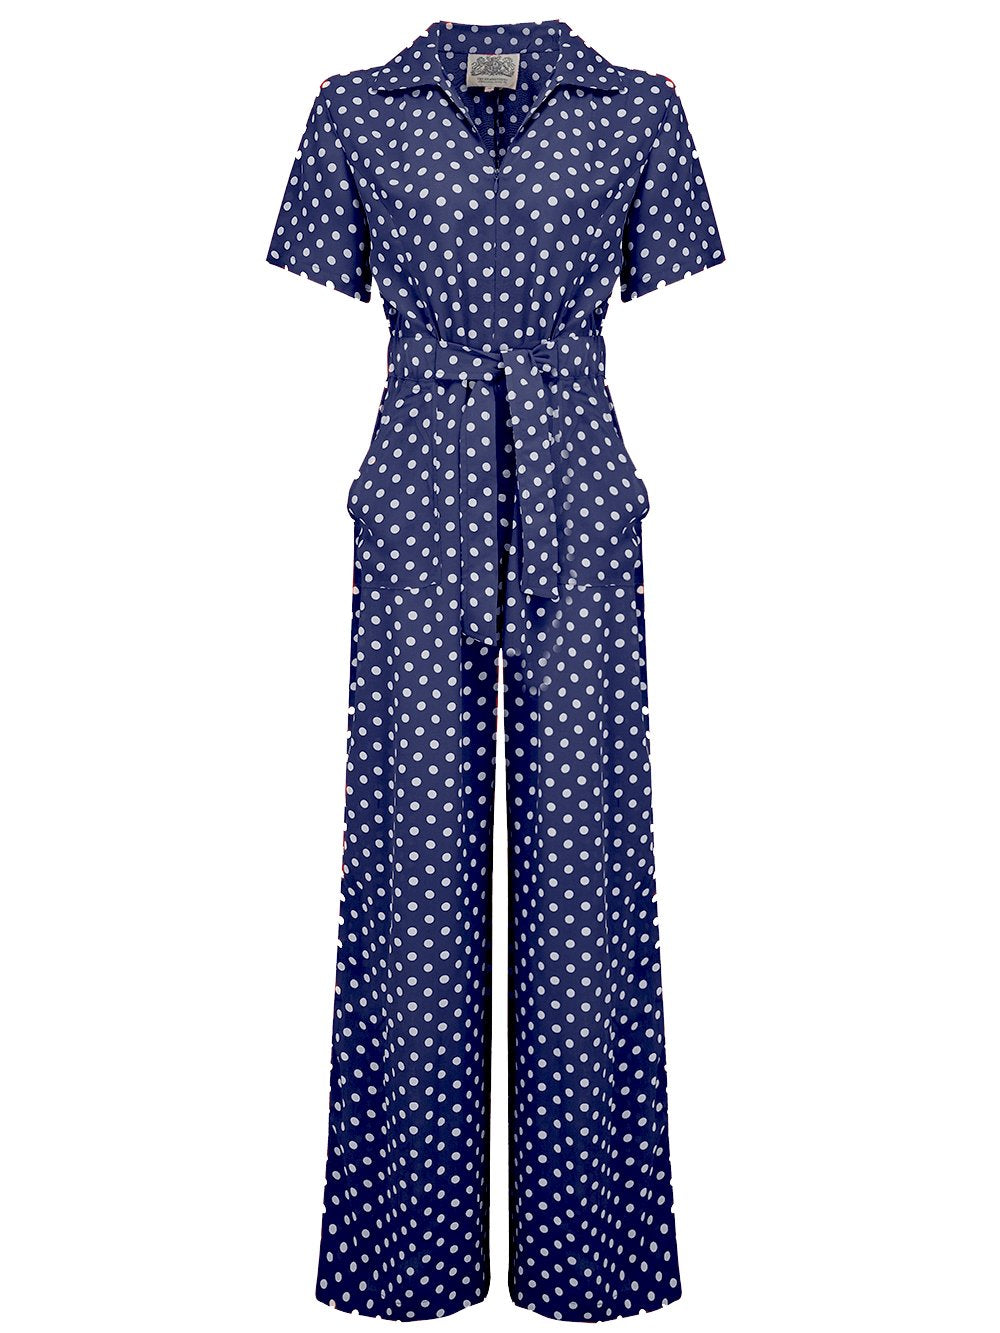 "Lauren" Siren Jump Suit in Navy Blue with Polka Dot Spots by The Seamstress of Bloomsbury, Classic 1940s Vintage Style - True and authentic vintage style clothing, inspired by the Classic styles of CC41 , WW2 and the fun 1950s RocknRoll era, for everyday wear plus events like Goodwood Revival, Twinwood Festival and Viva Las Vegas Rockabilly Weekend Rock n Romance The Seamstress Of Bloomsbury